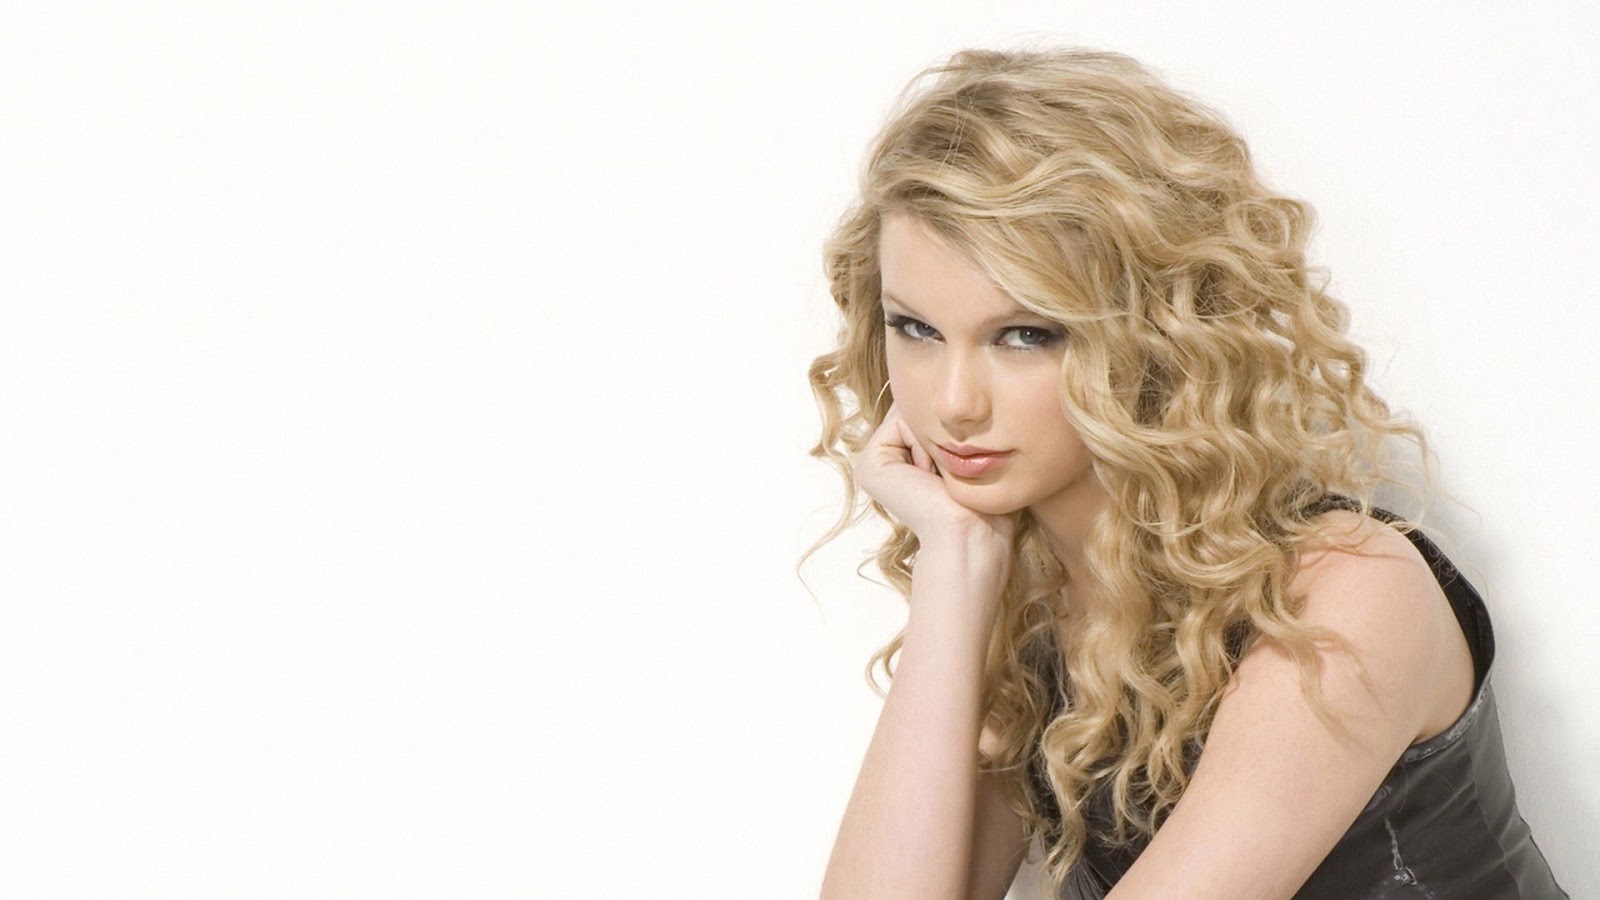 New Wallpaper Taylor Swift Hot And